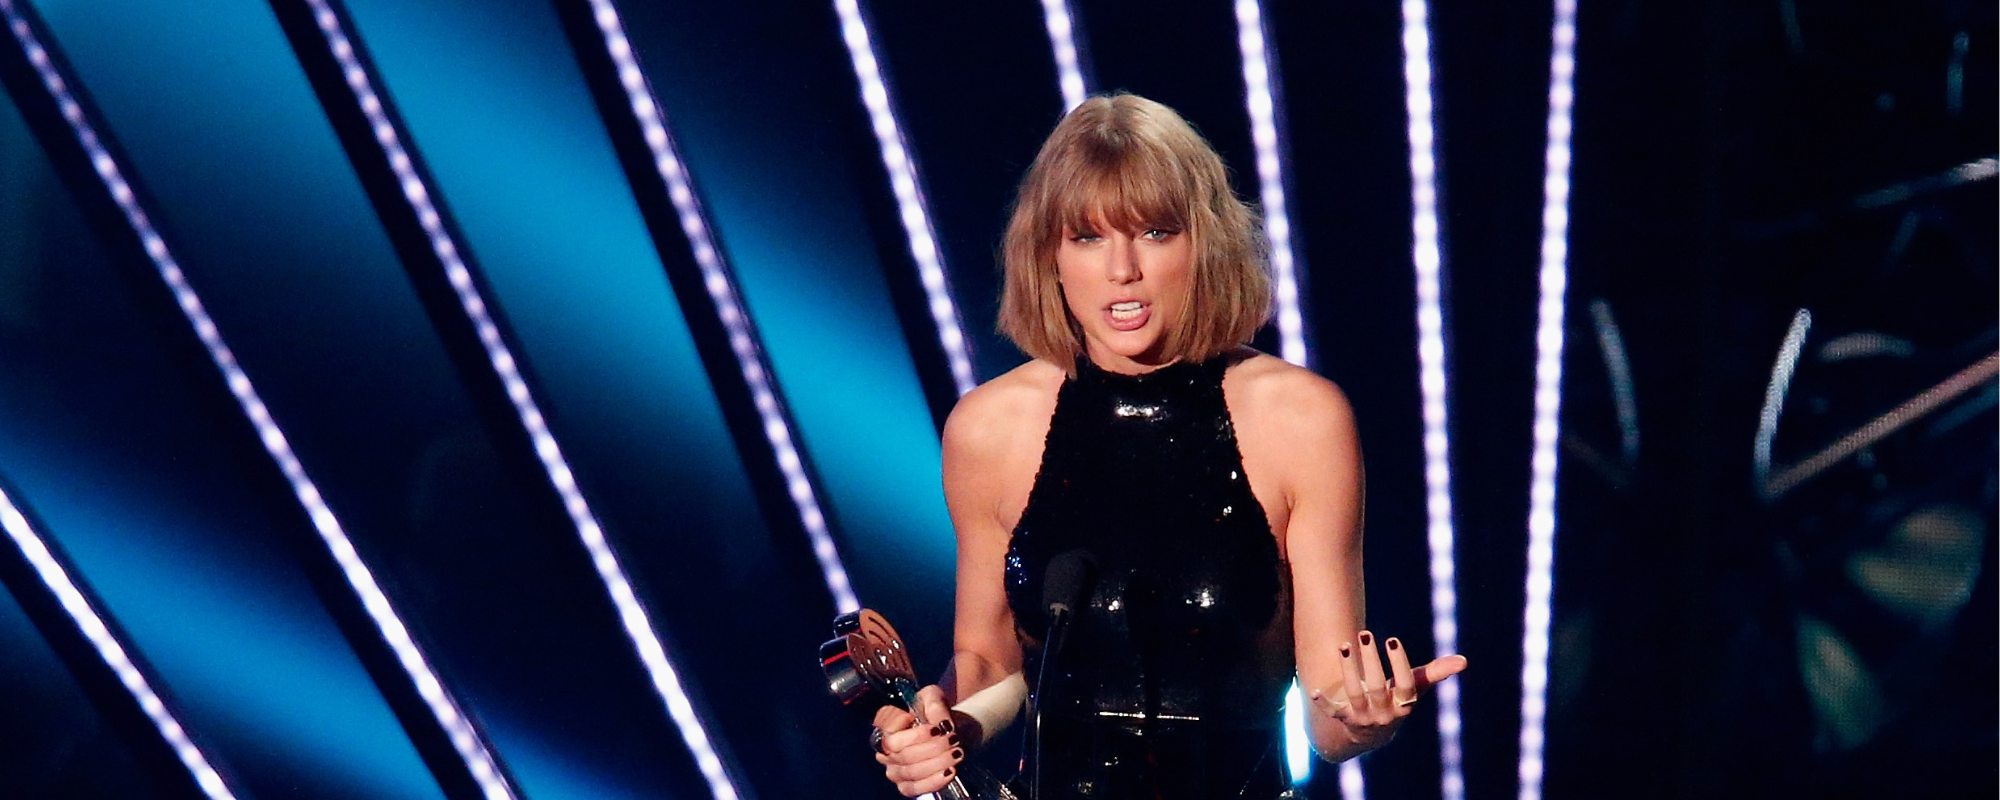 Will Anyone Attempt (Their Version) Albums Like Taylor Swift? Music Execs Hope Not